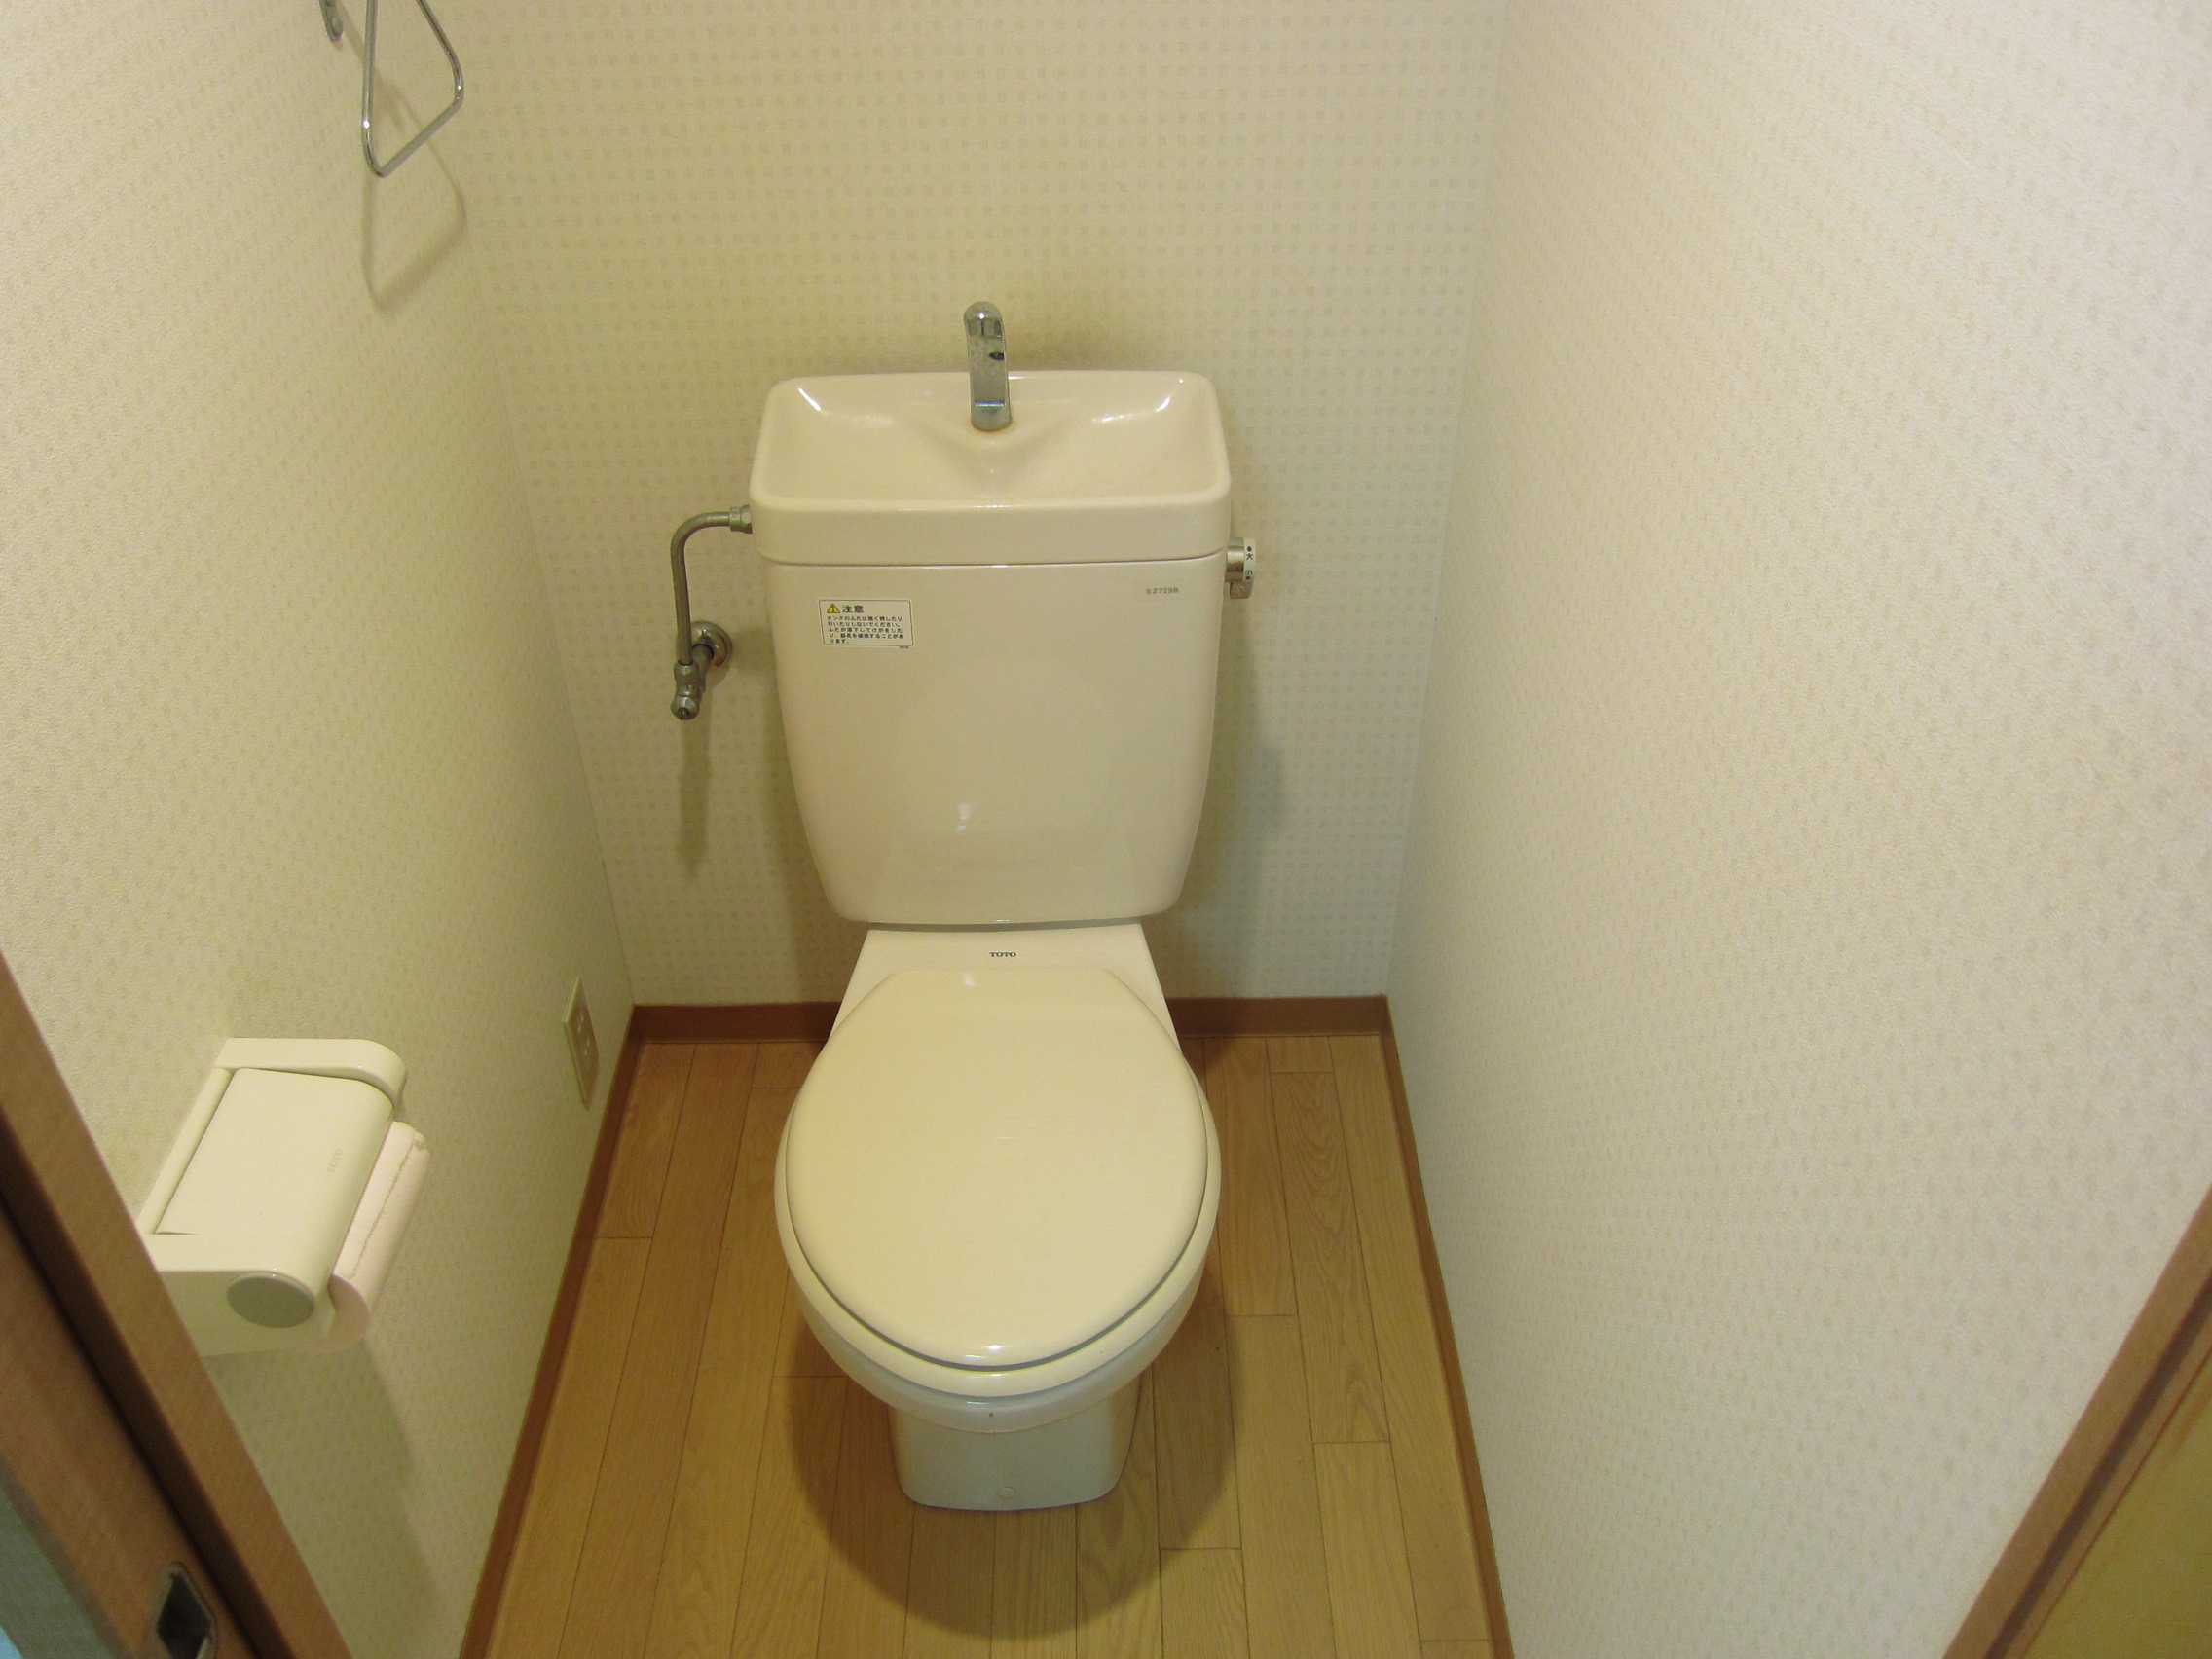 Toilet. It is a simple type.